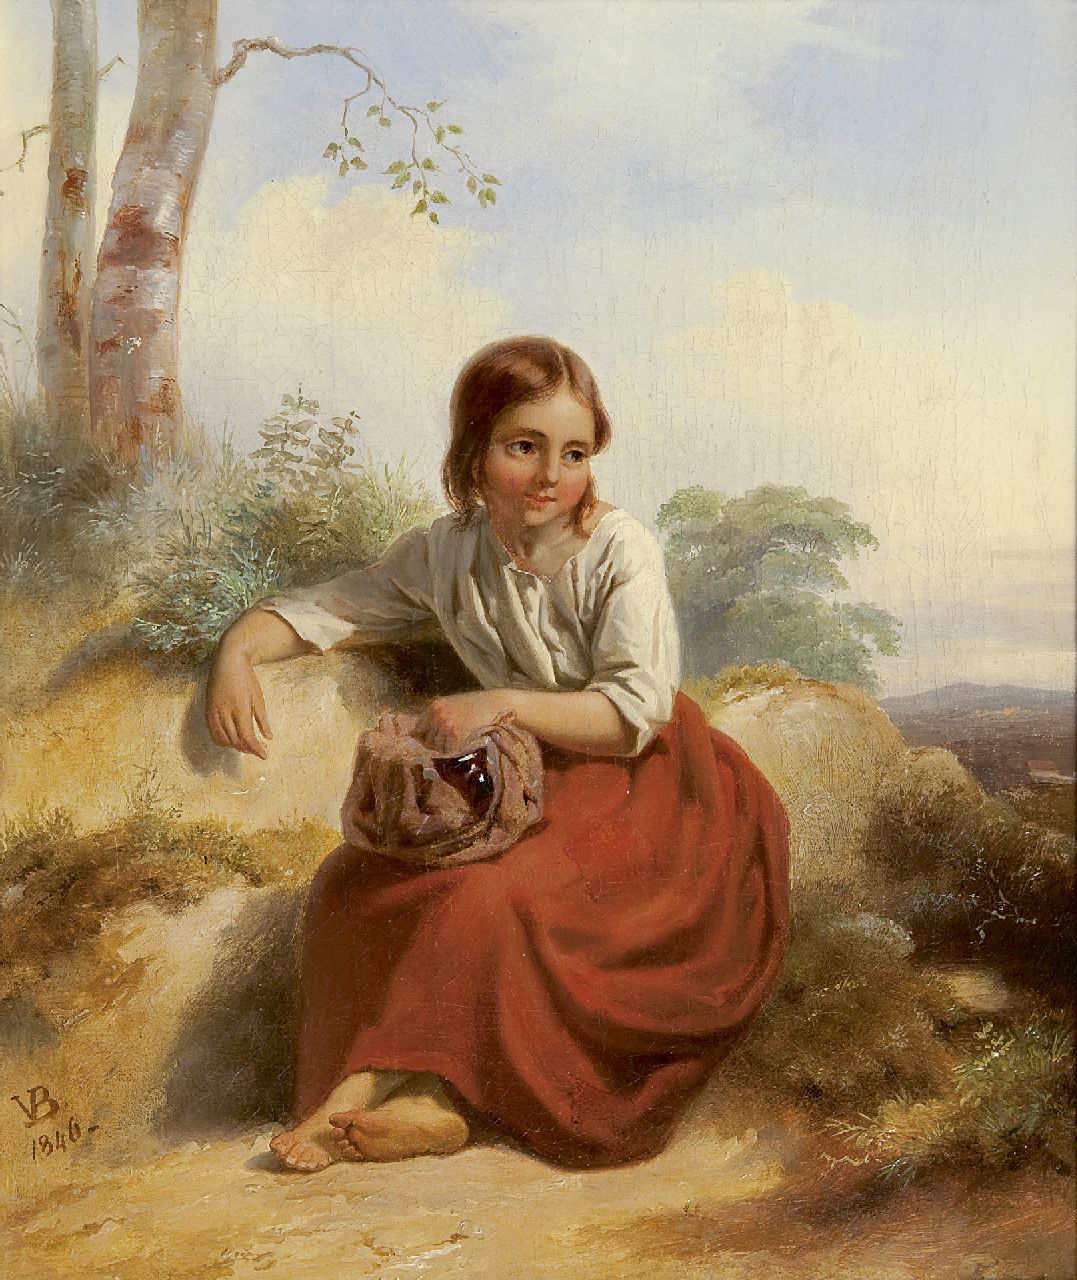 Bing V.  | Valentijn Bing, A young shepherdess, oil on canvas 33.8 x 27.7 cm, signed l.l. with monogram and dated 1846